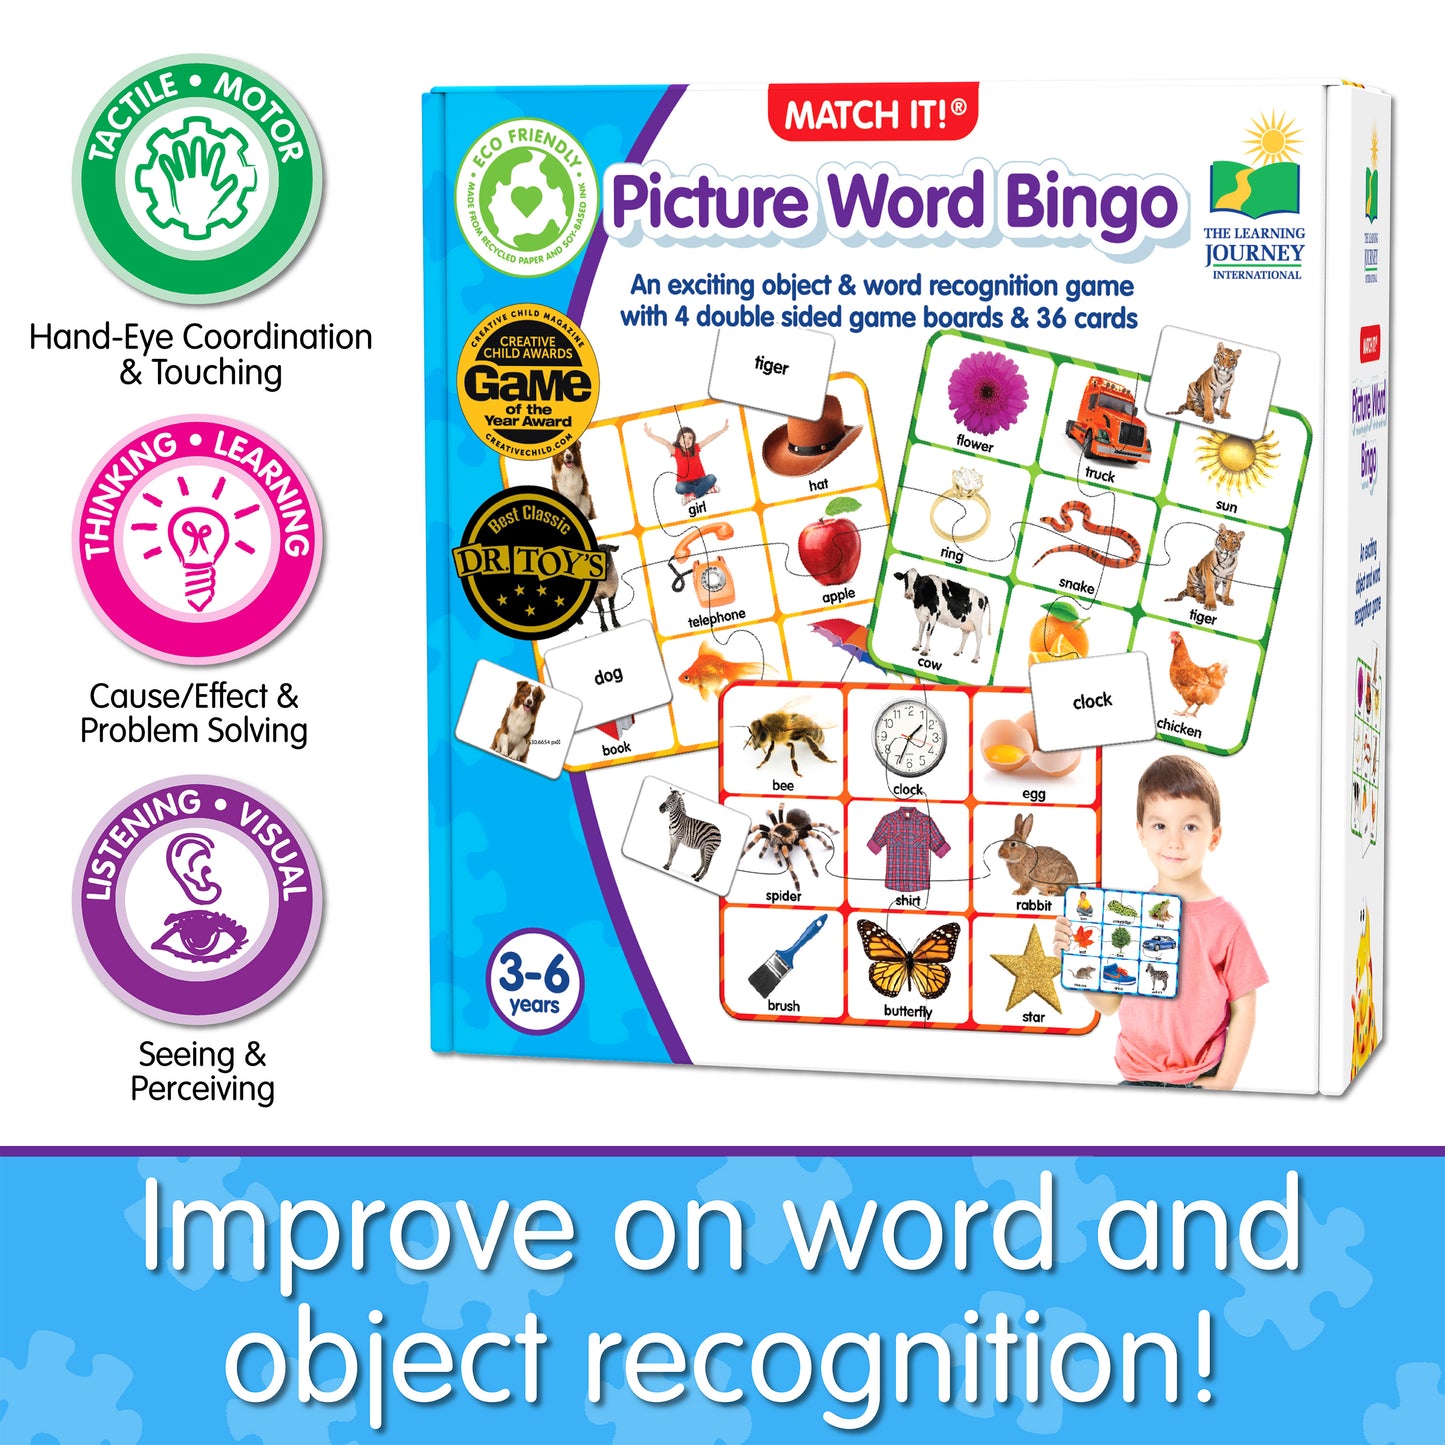 Infographic about Match It - Picture Word Bingo's educational benefits that says, "Improve on word and object recognition!"